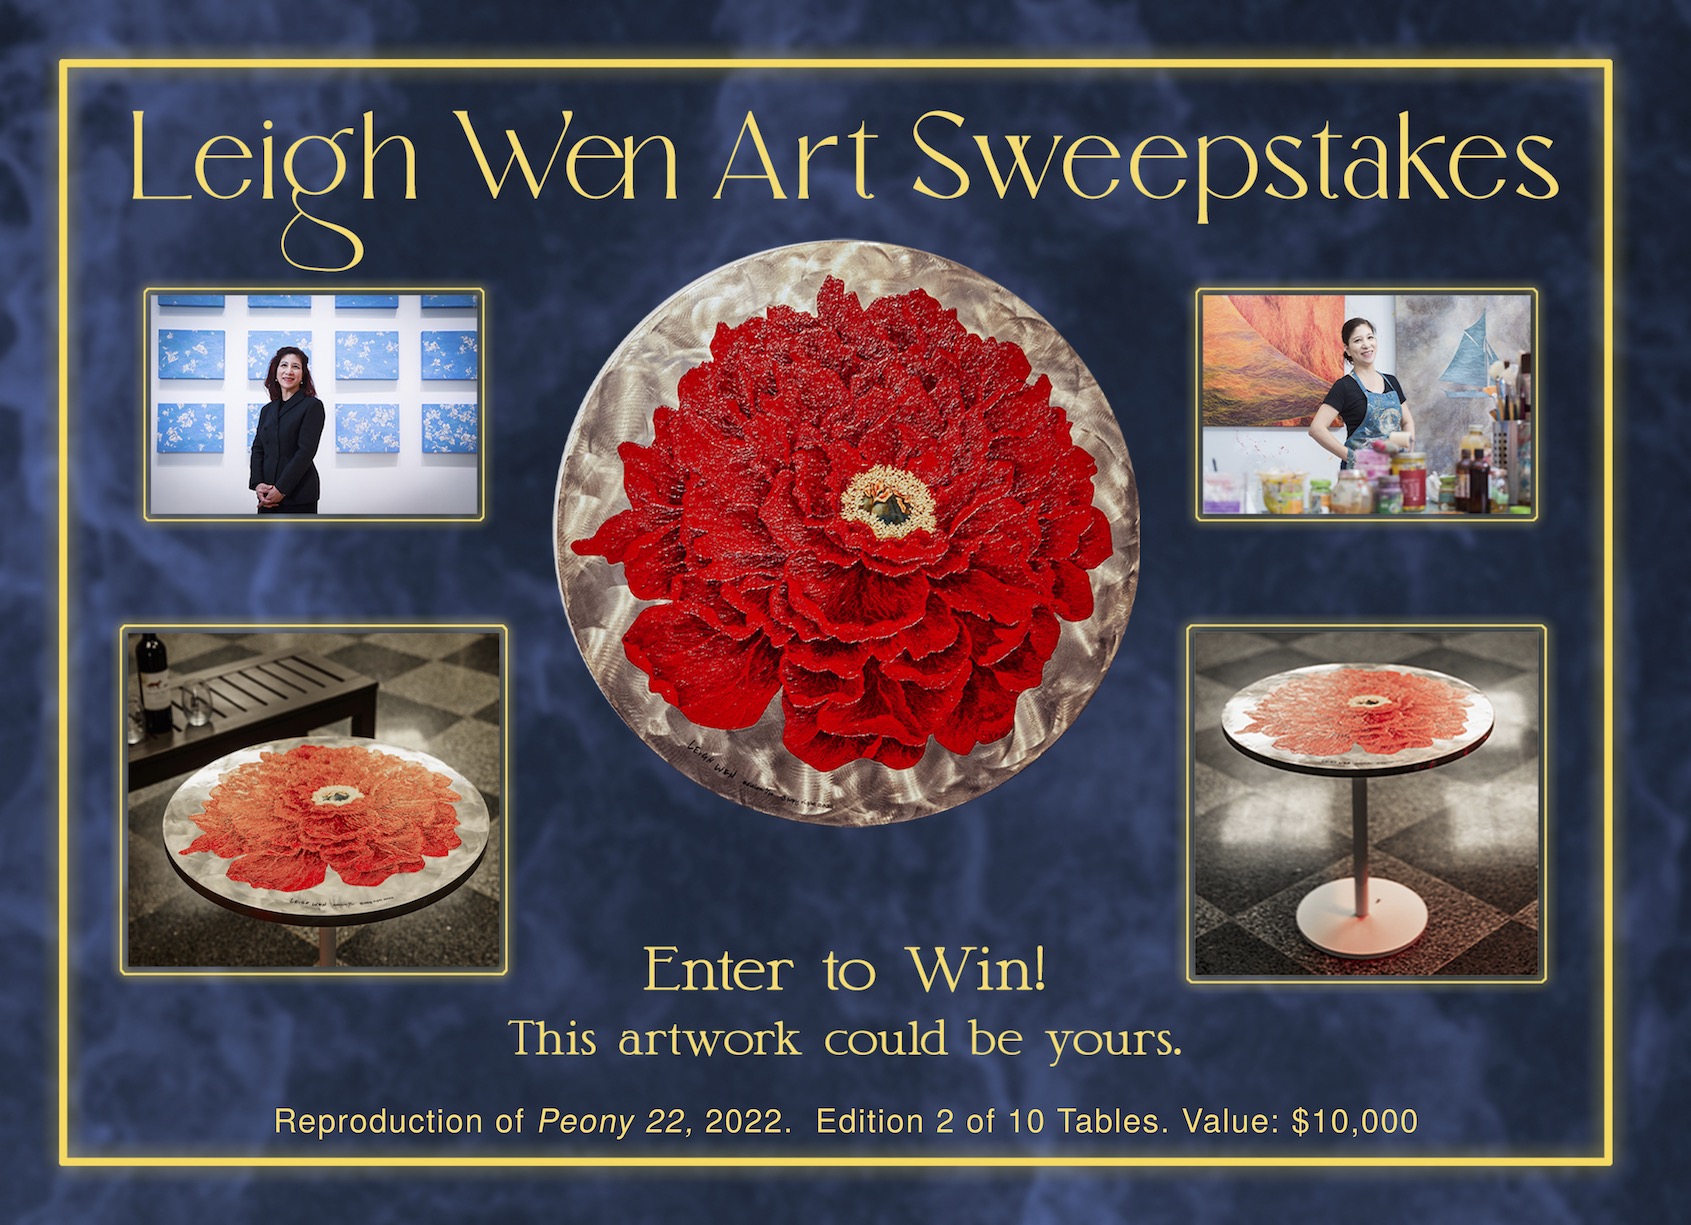 Leigh Wen art sweepstakes postcard with text that reads enter to win, this arwork could be yours. 2 images of the artist and 3 images of their work can be seen collaged on the postcard. 